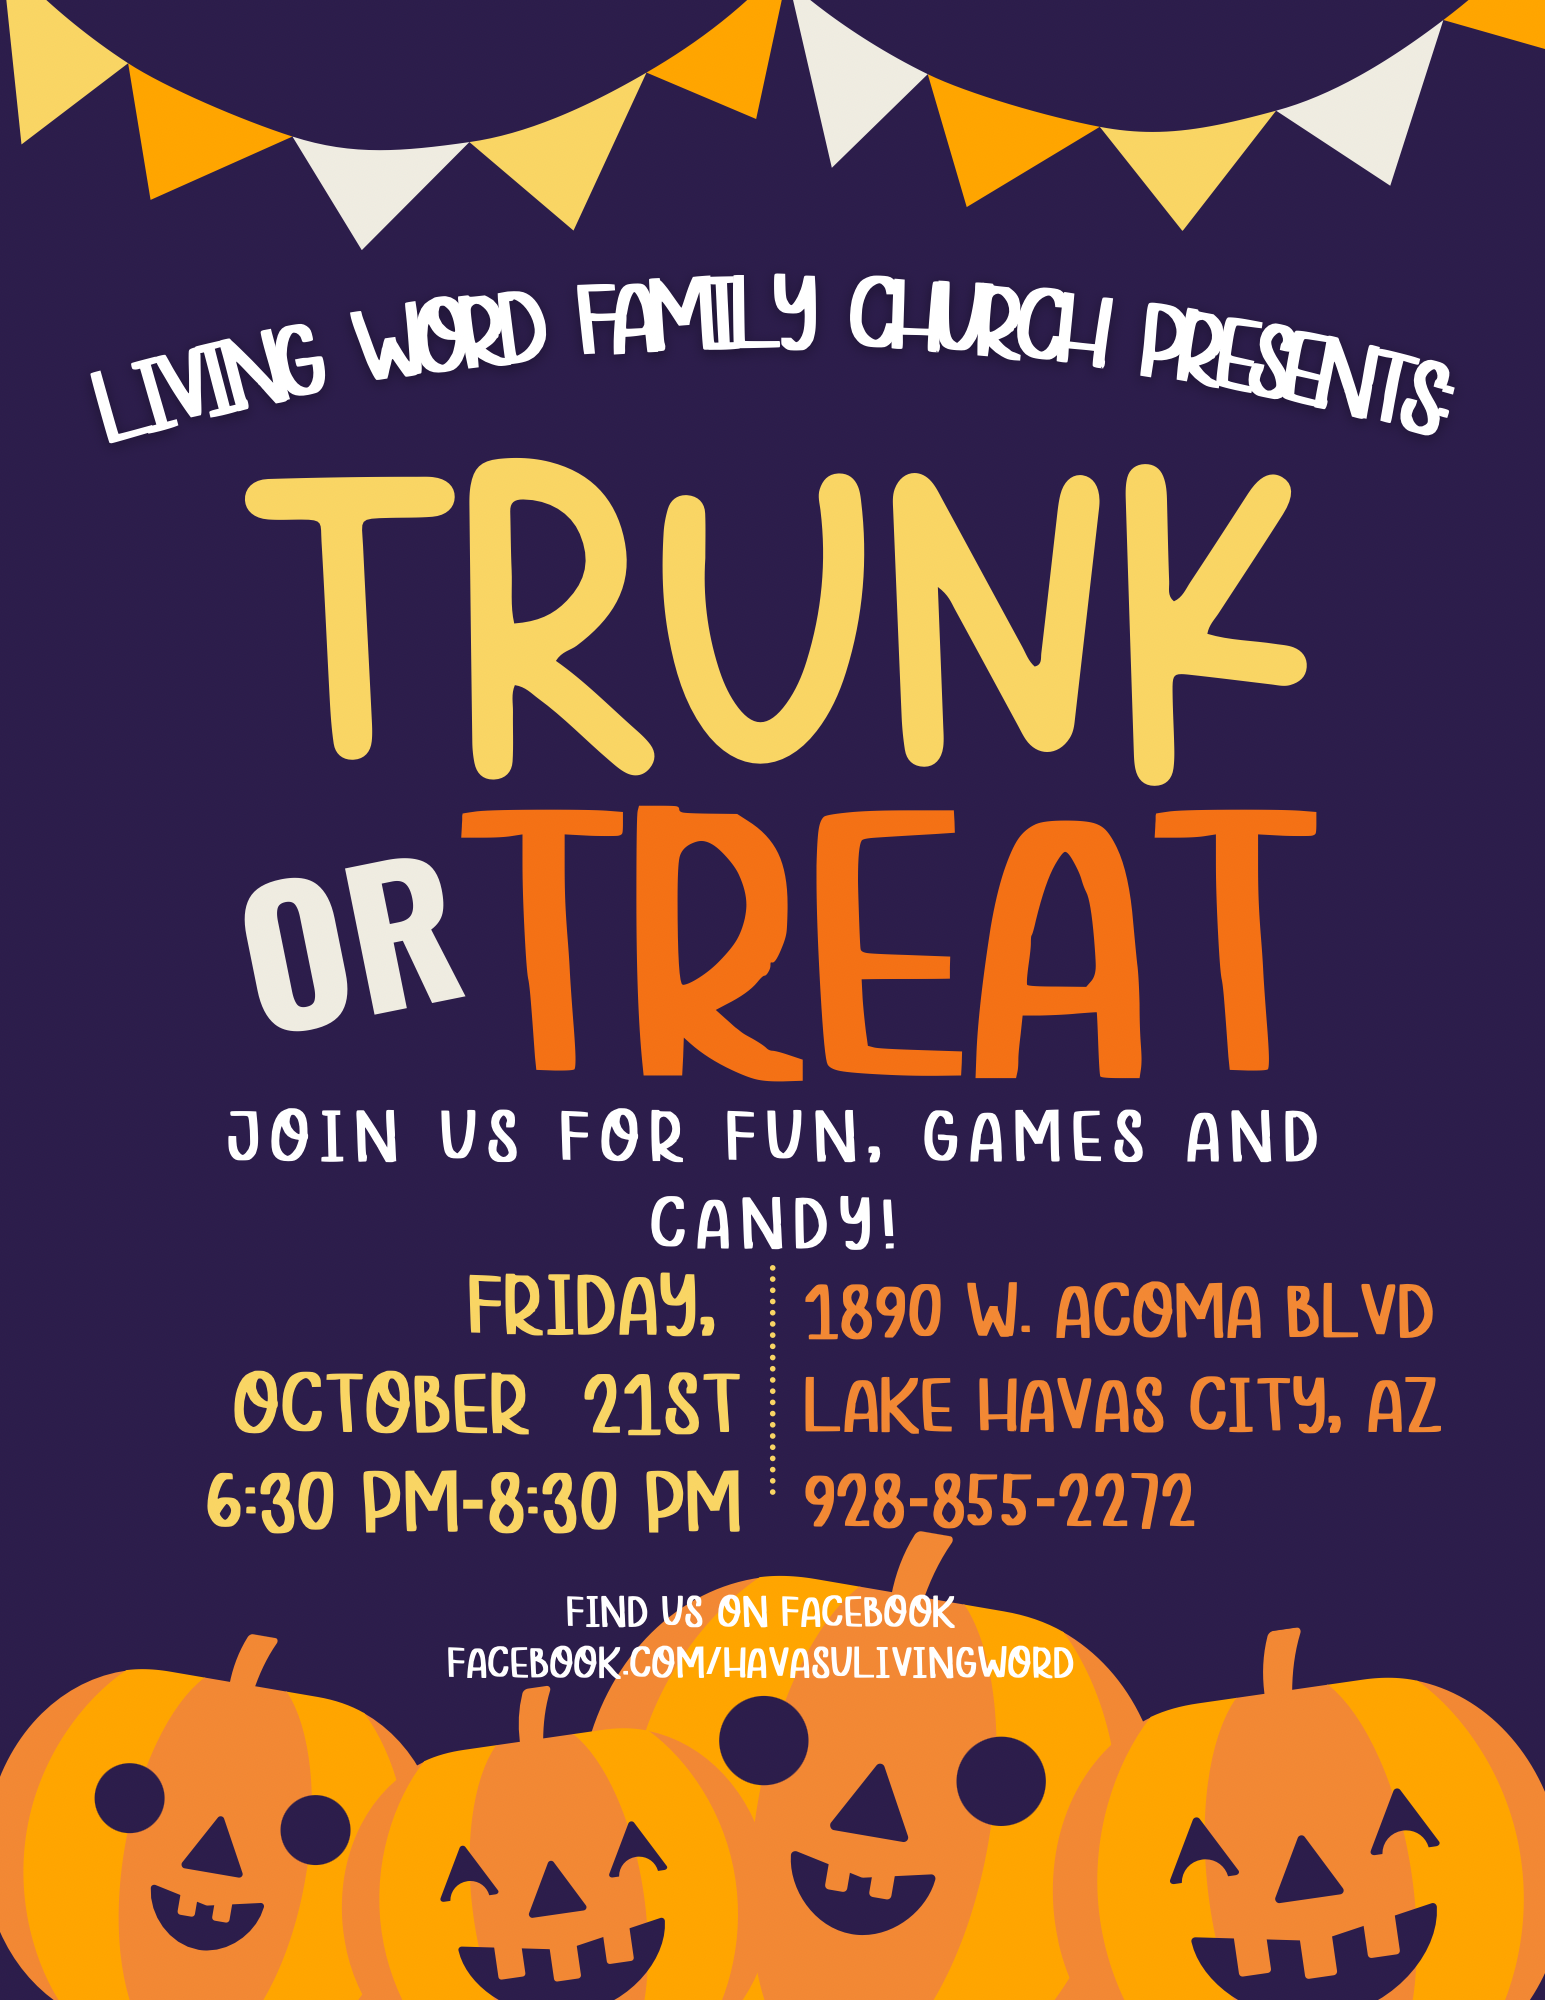 Living Word Family Church’s Trunk or Treat